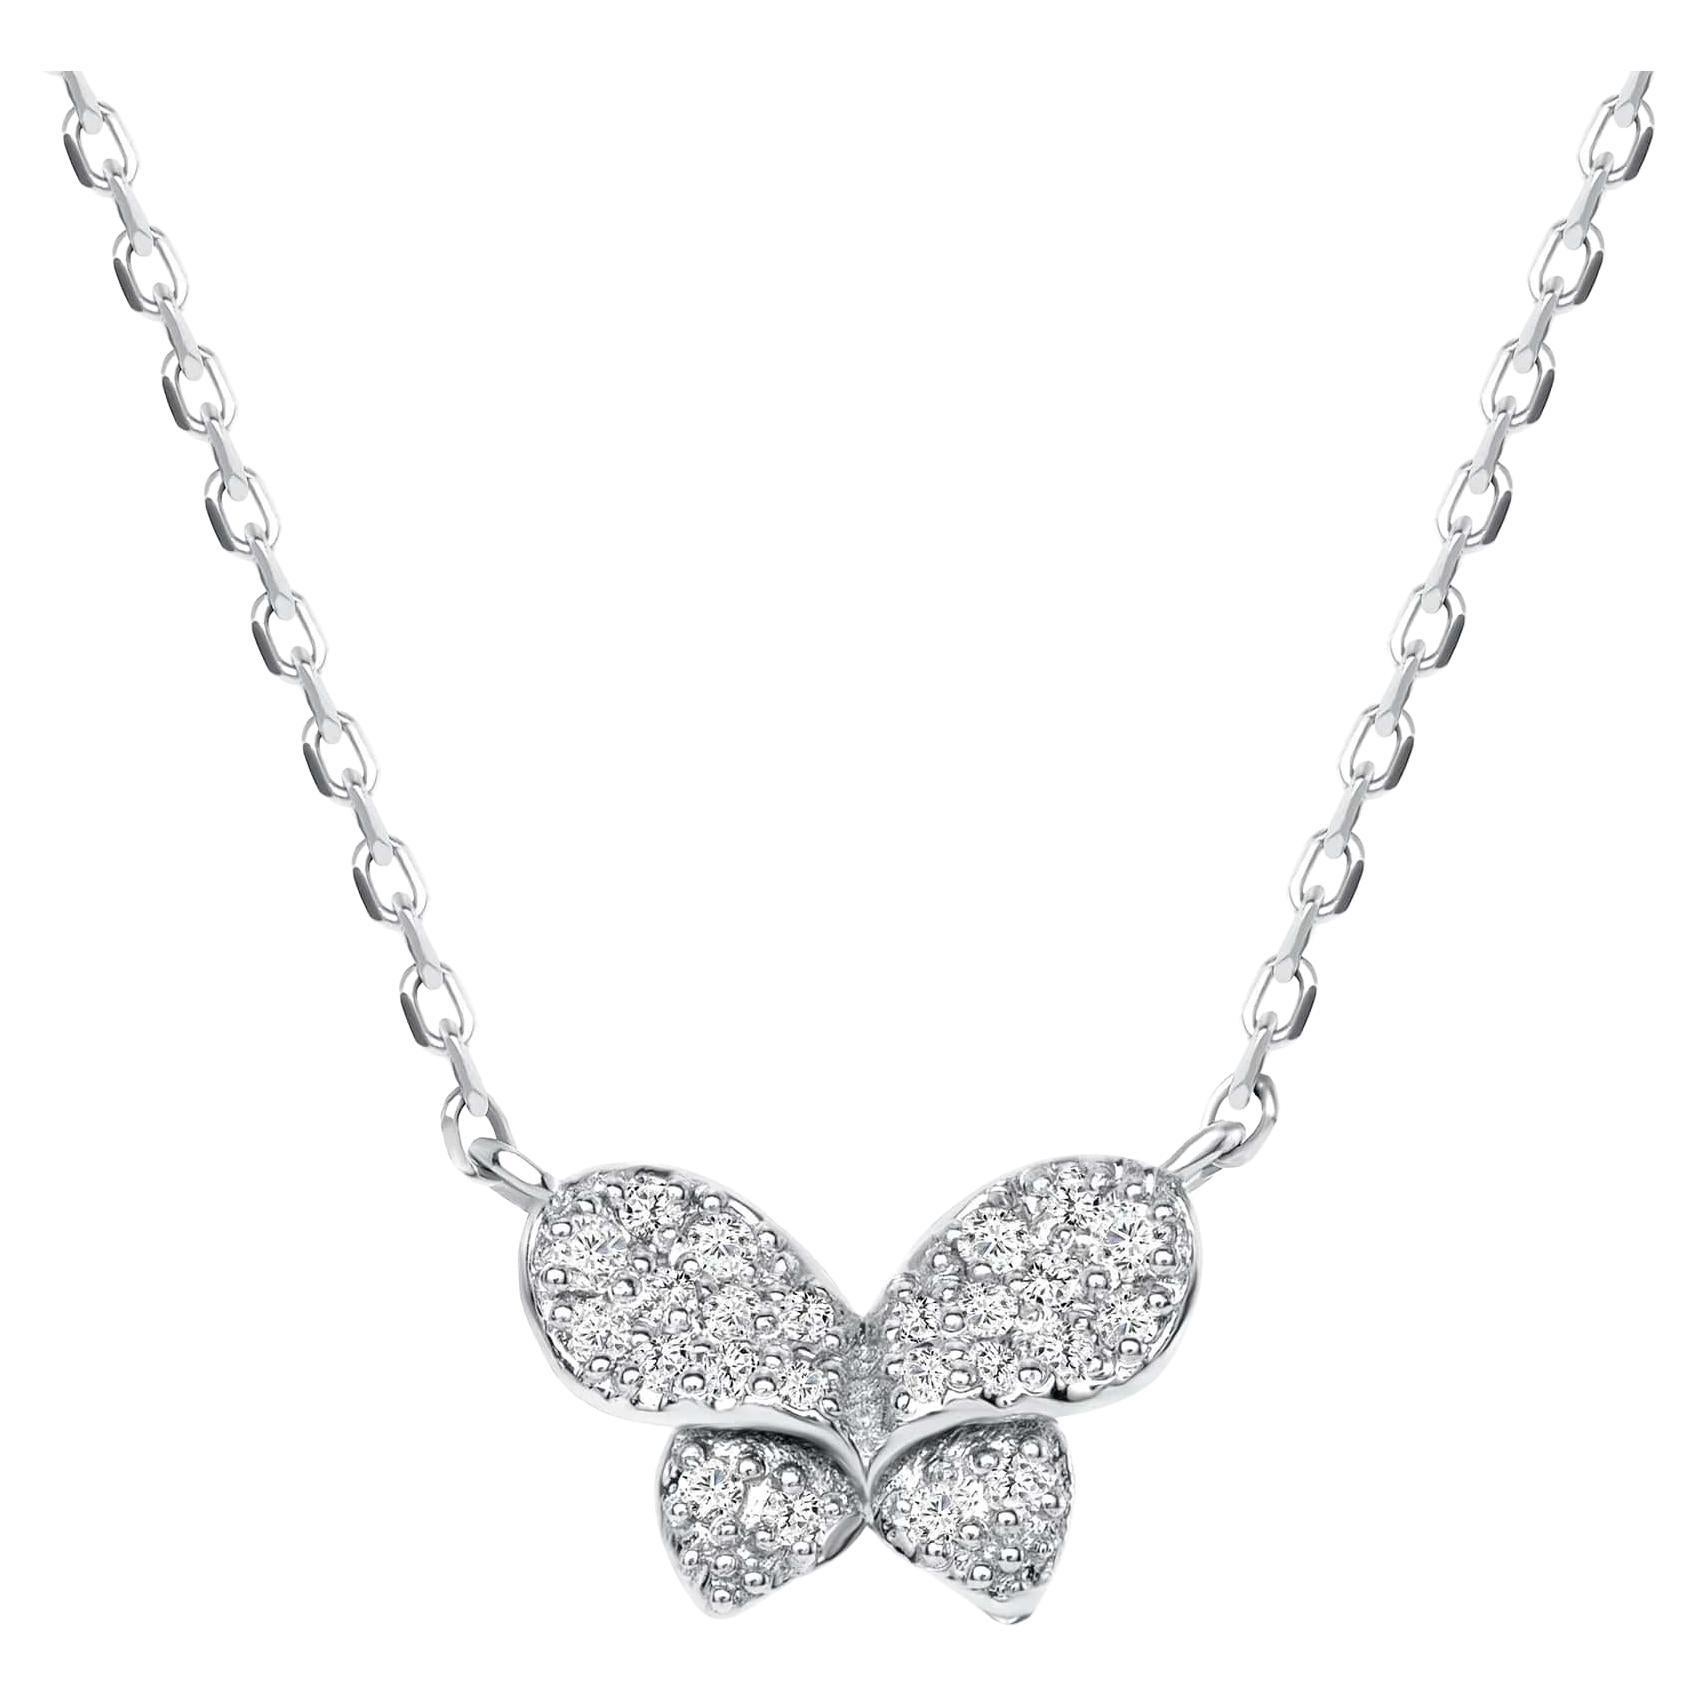 A beautiful Butterfly Pendant Necklace adorned by small natural Round Cut Diamonds in Pave Setting. A thoughtful gift for Anniversary, Birthday, Graduation, Valentine's, and Holidays for someone you love.

Necklace Information
Gold : 14k Gold, 18k